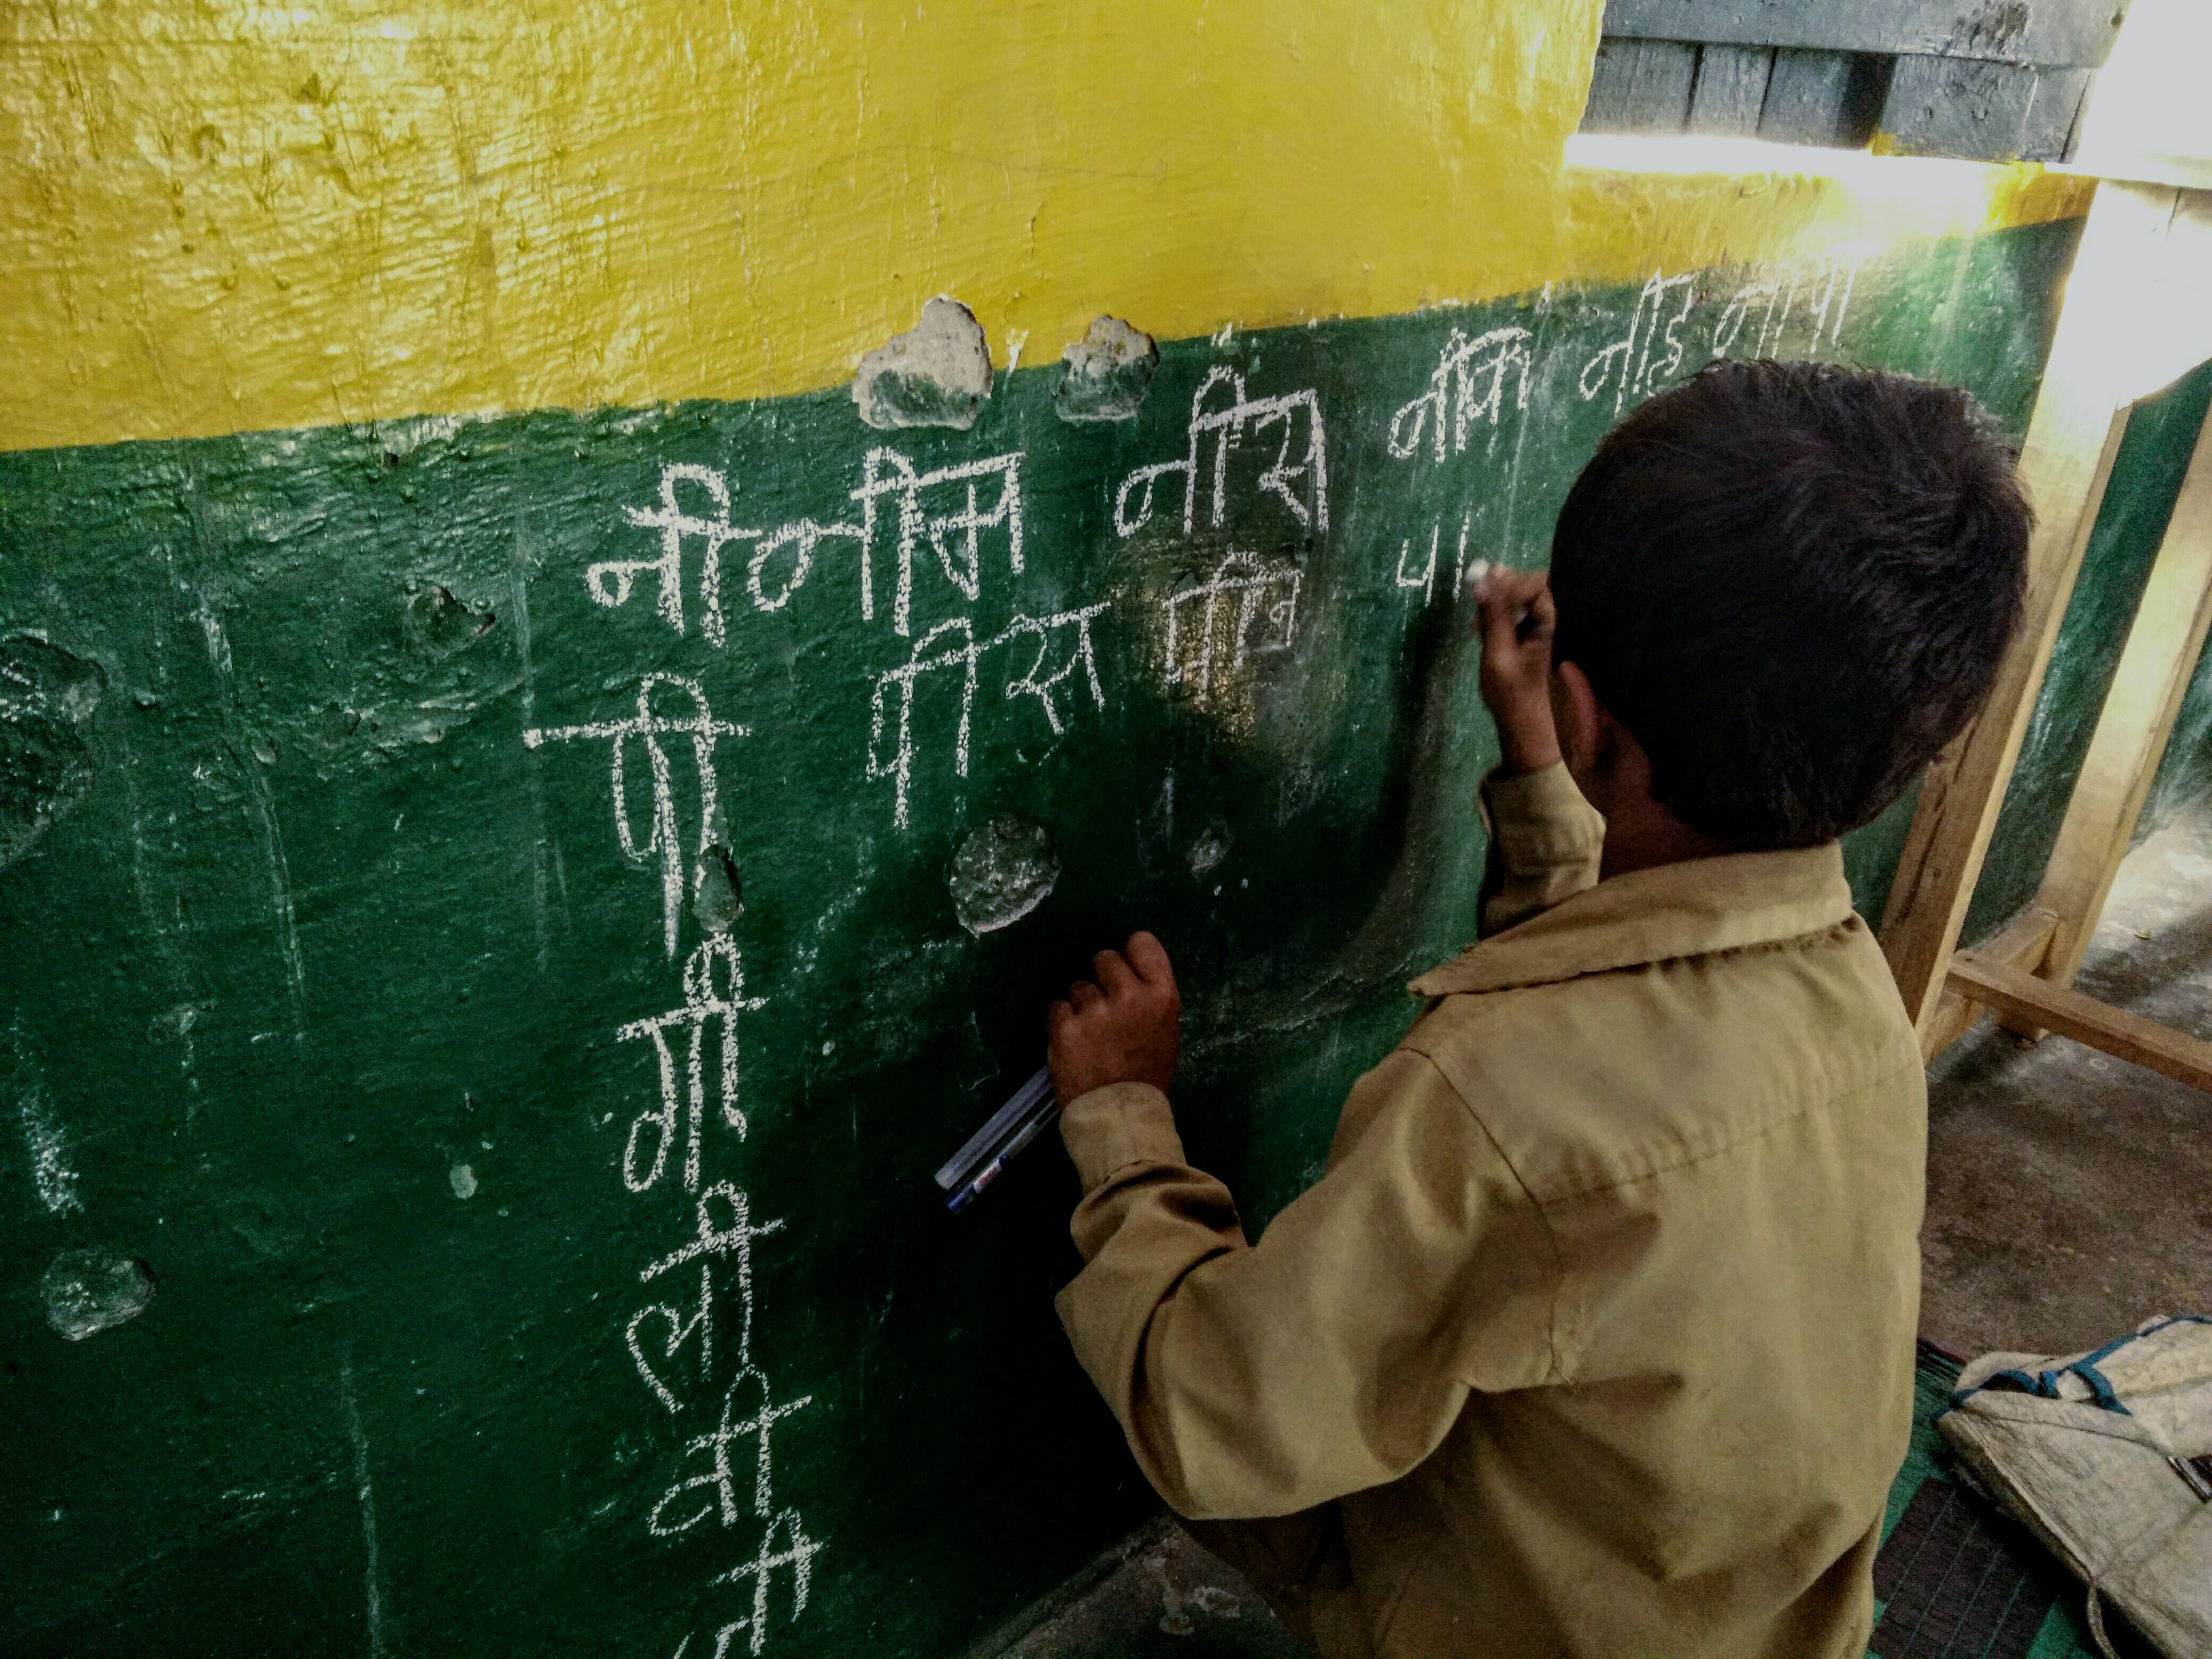 A child uses chalk to write on the wall during a TaRL reading activity in Karnataka, India.